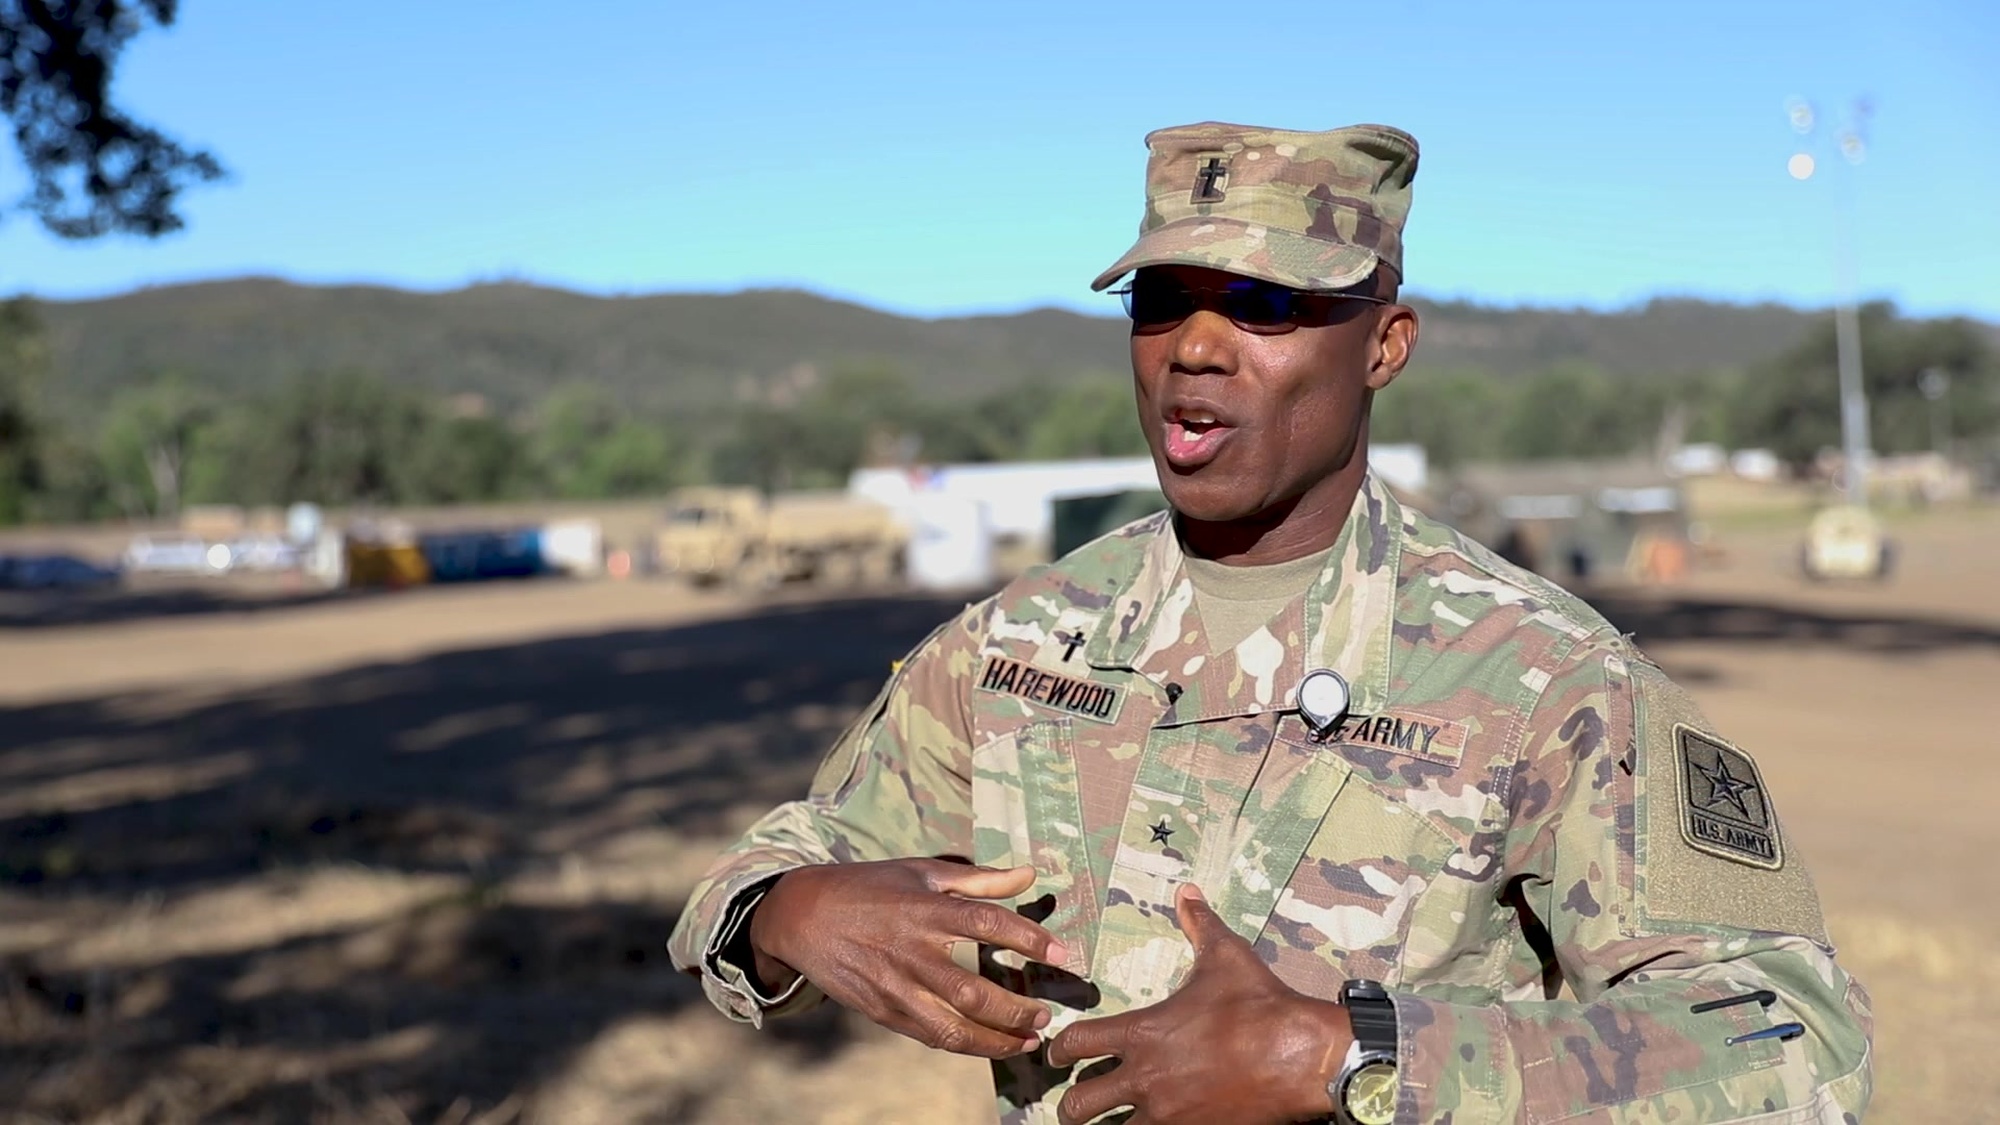 U.S. Army Reserve Brig. Gen. Andrew Harewood, Deputy Chief of Chaplains from Washington, D.C., gives a speech during Combat Support Training Exercise (CSTX) 91-21-01 June 11, 2021, at Fort Hunter Liggett, California.